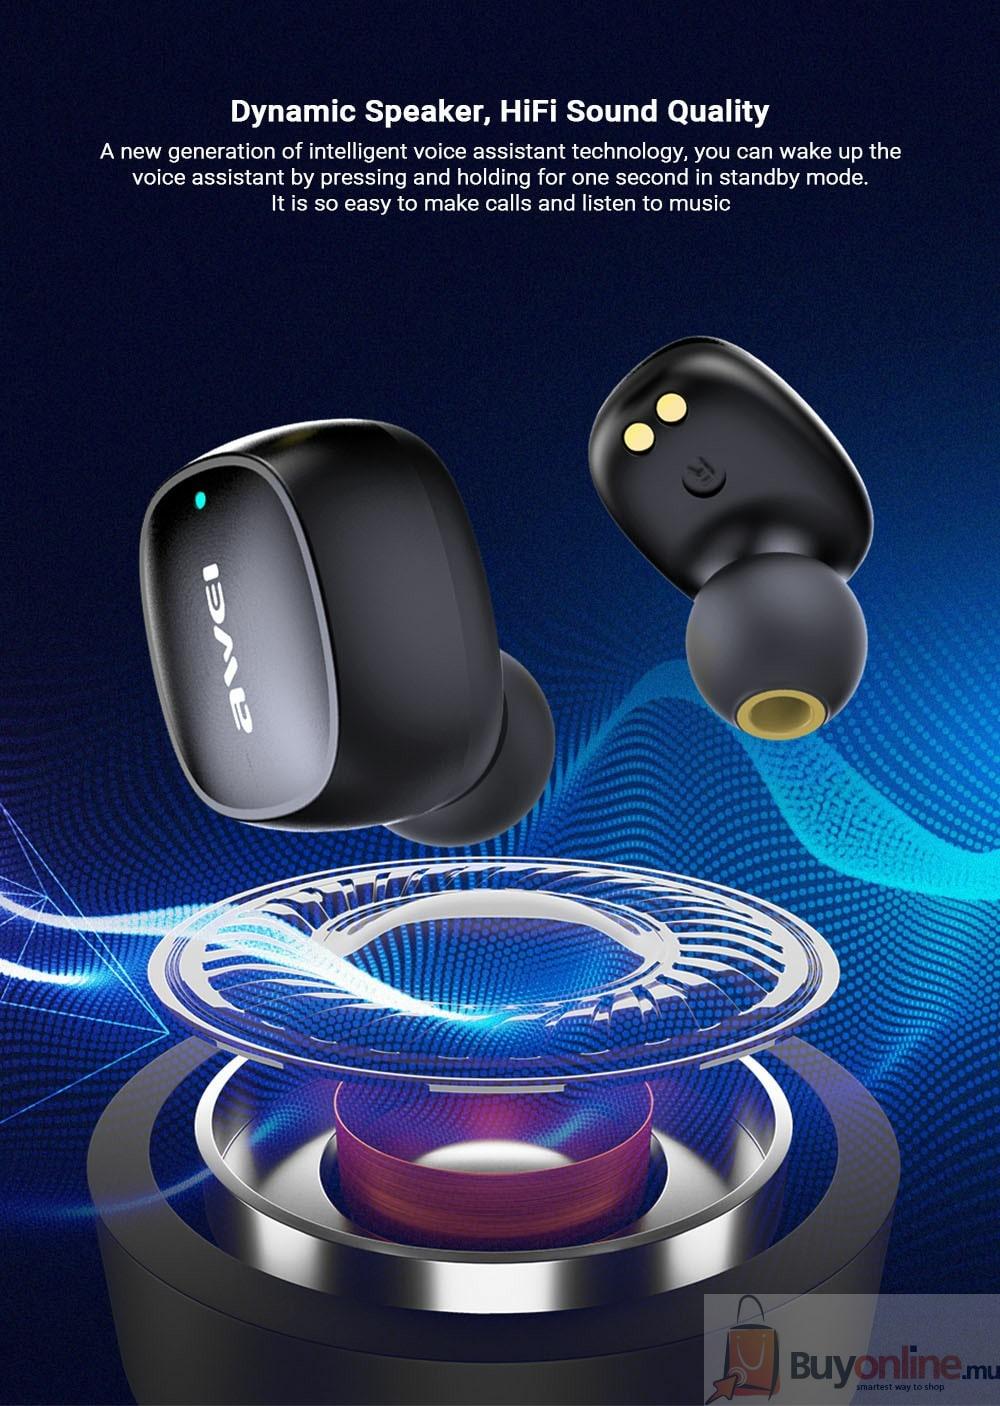 image 2022 01 23 223546 - Awei T20 Touch Water Resistant TWS Earphones with Microphone and Charging Base IPX4 Bluetooth 5.0 - BuyOnline.mu - Earbuds,Earphone,Earbud,T20,Awei